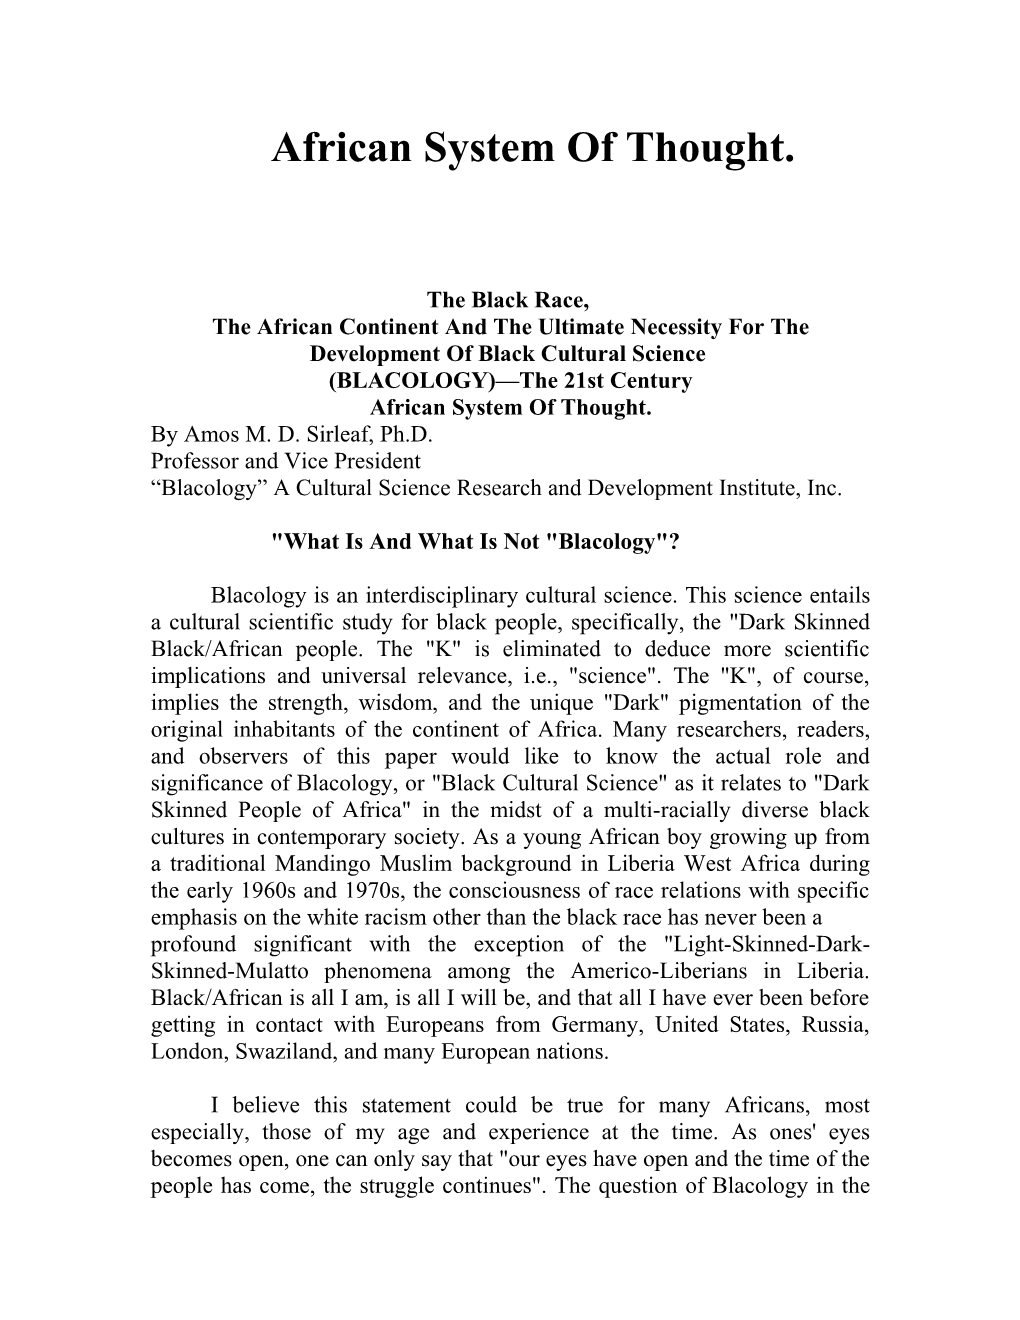 African System of Thought